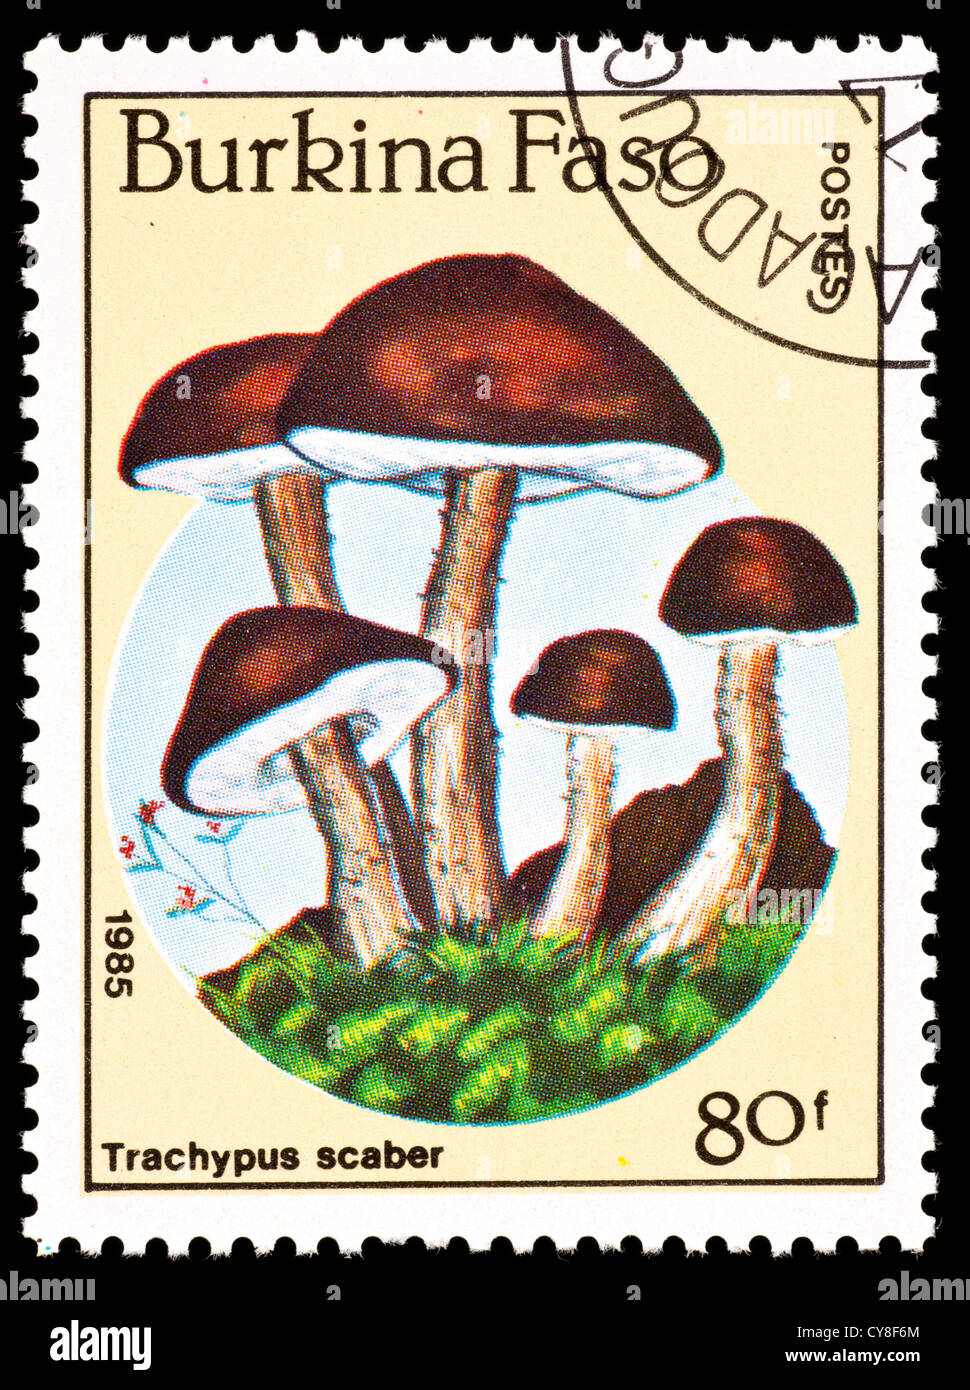 Postage stamp from Burkina Faso depicting mushrooms (Trachypus scaber) Stock Photo